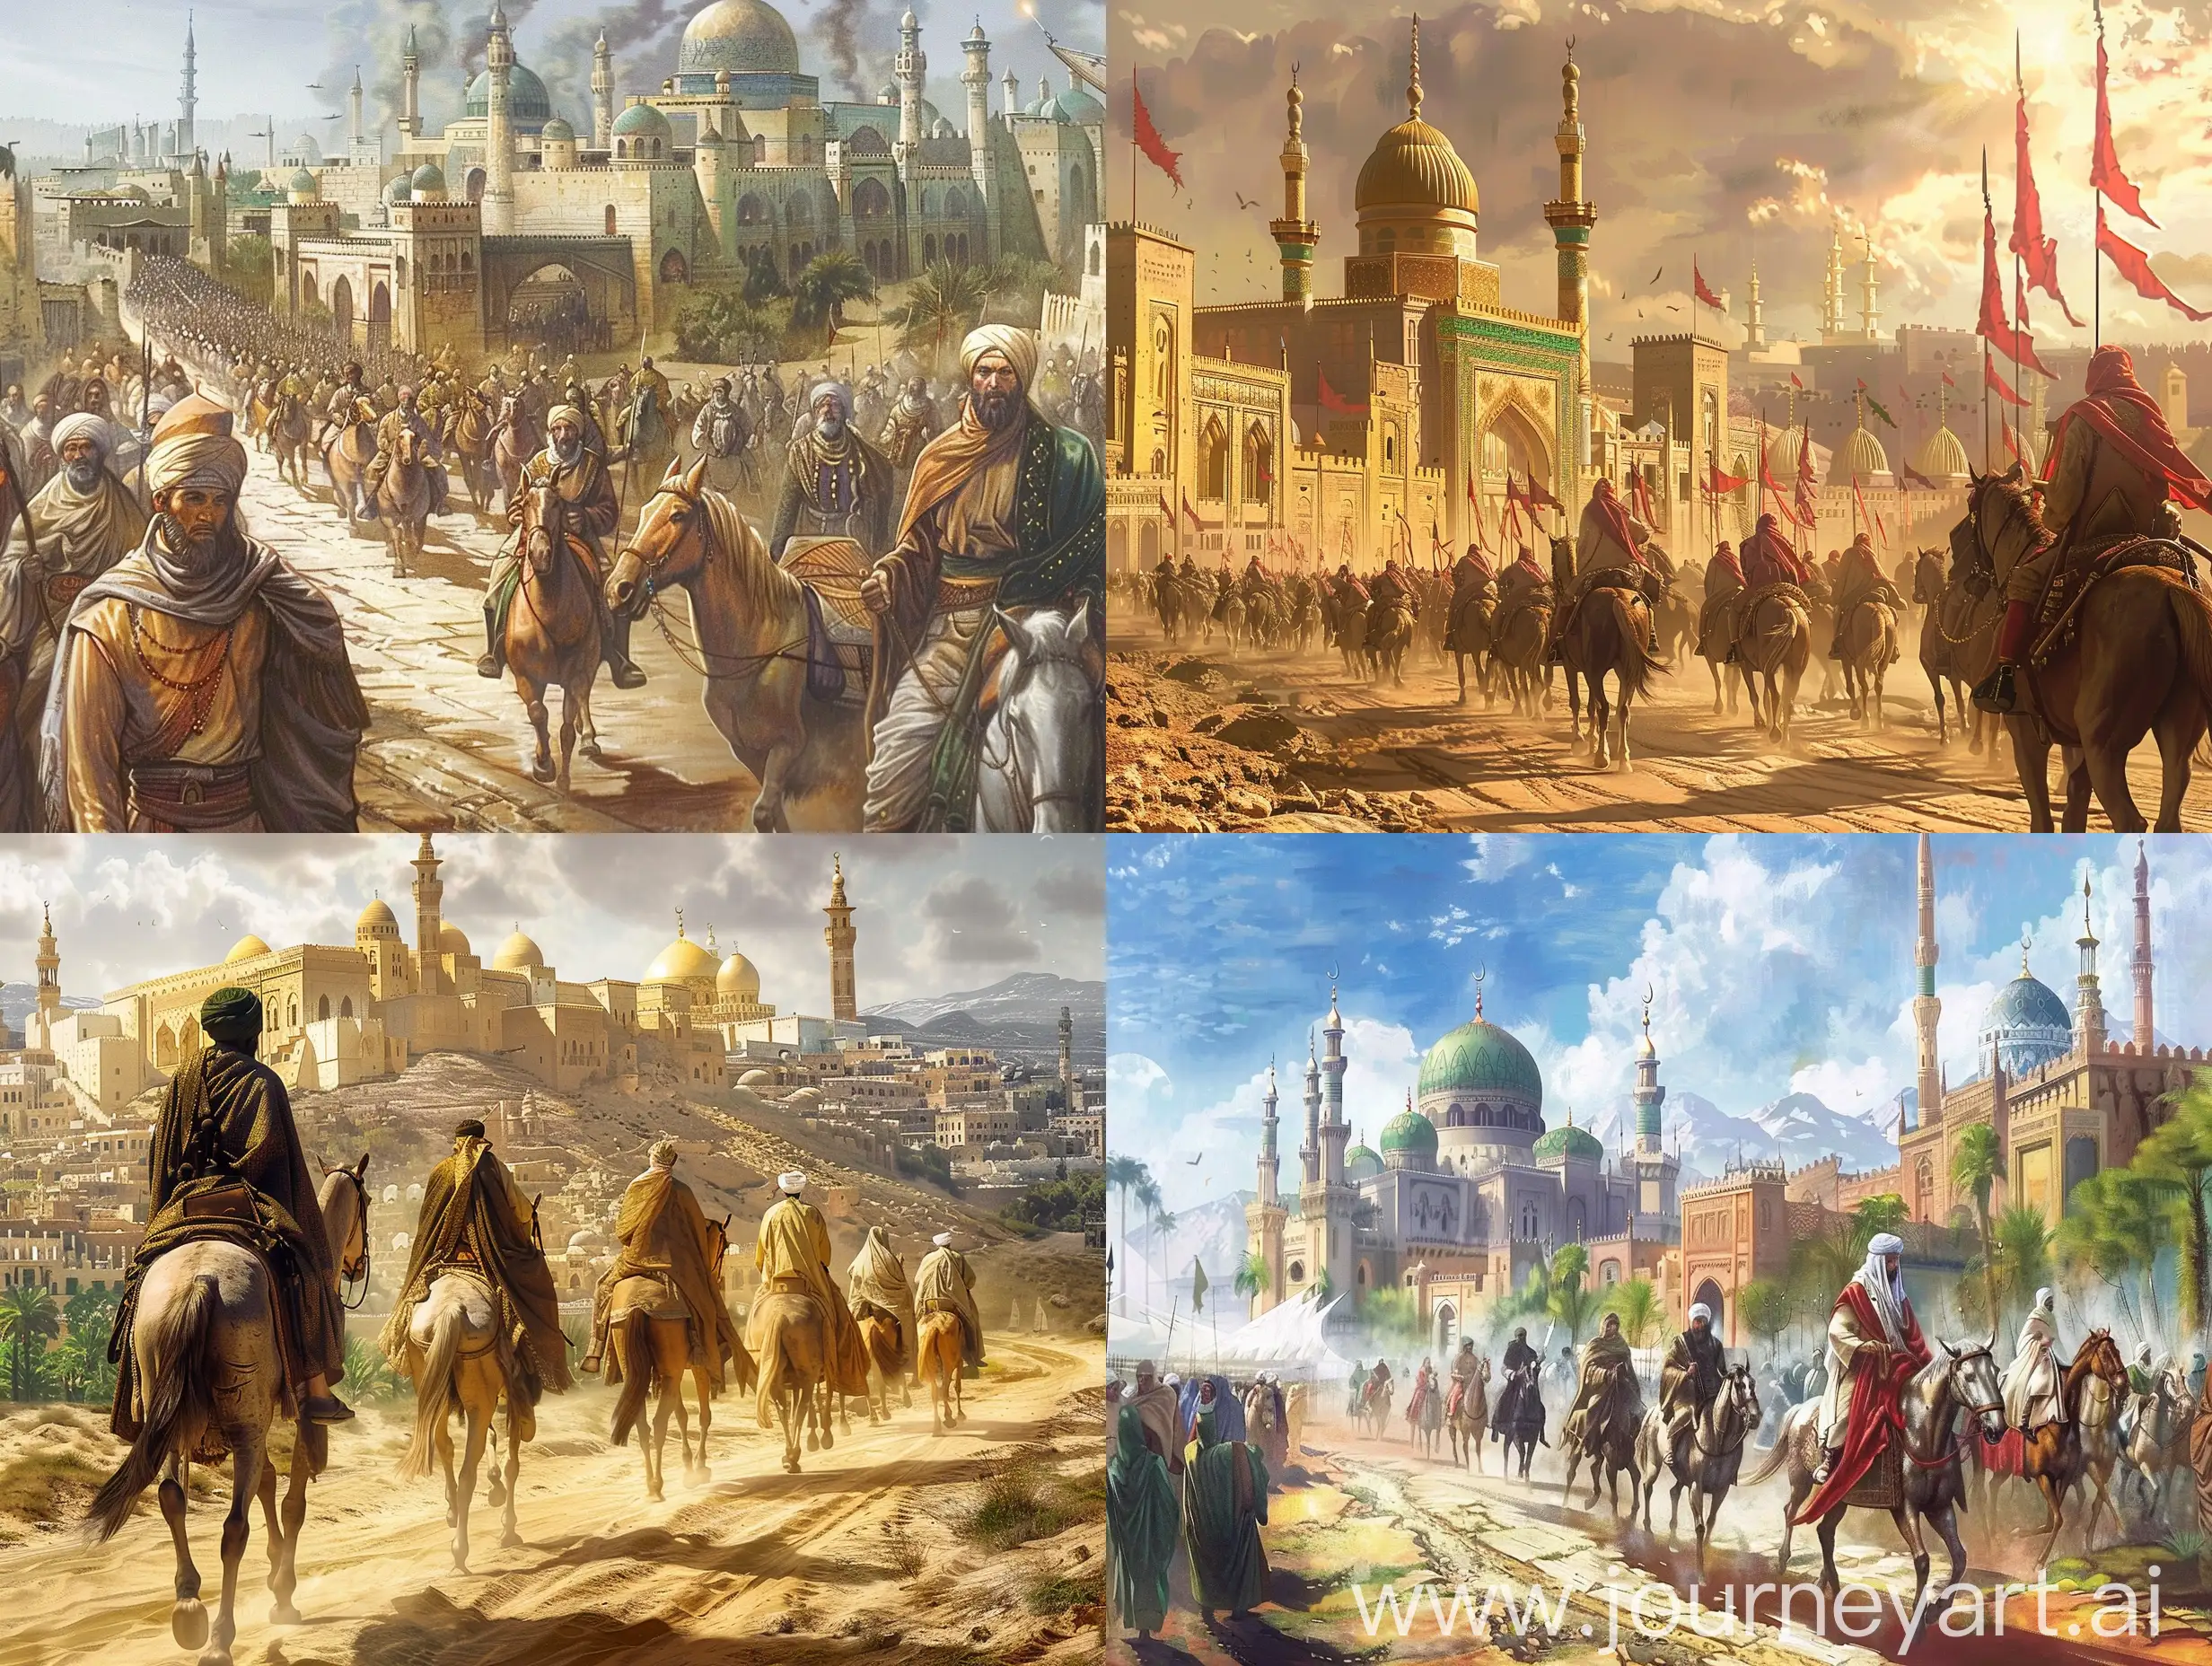 The spread of Islam followed a similar pattern. With the migration of Prophet Muhammad from Mecca to Medina, the political and military power of Islam began to increase. During the Medina period, Muslims fought many wars for both defense and conquest. During the period of the Four Caliphs, Islam spread beyond the Arabian Peninsula to a wide geography such as Syria, Iraq, Egypt and Iran. These conquests enabled Islam to grow rapidly and be effective in a wide geography.